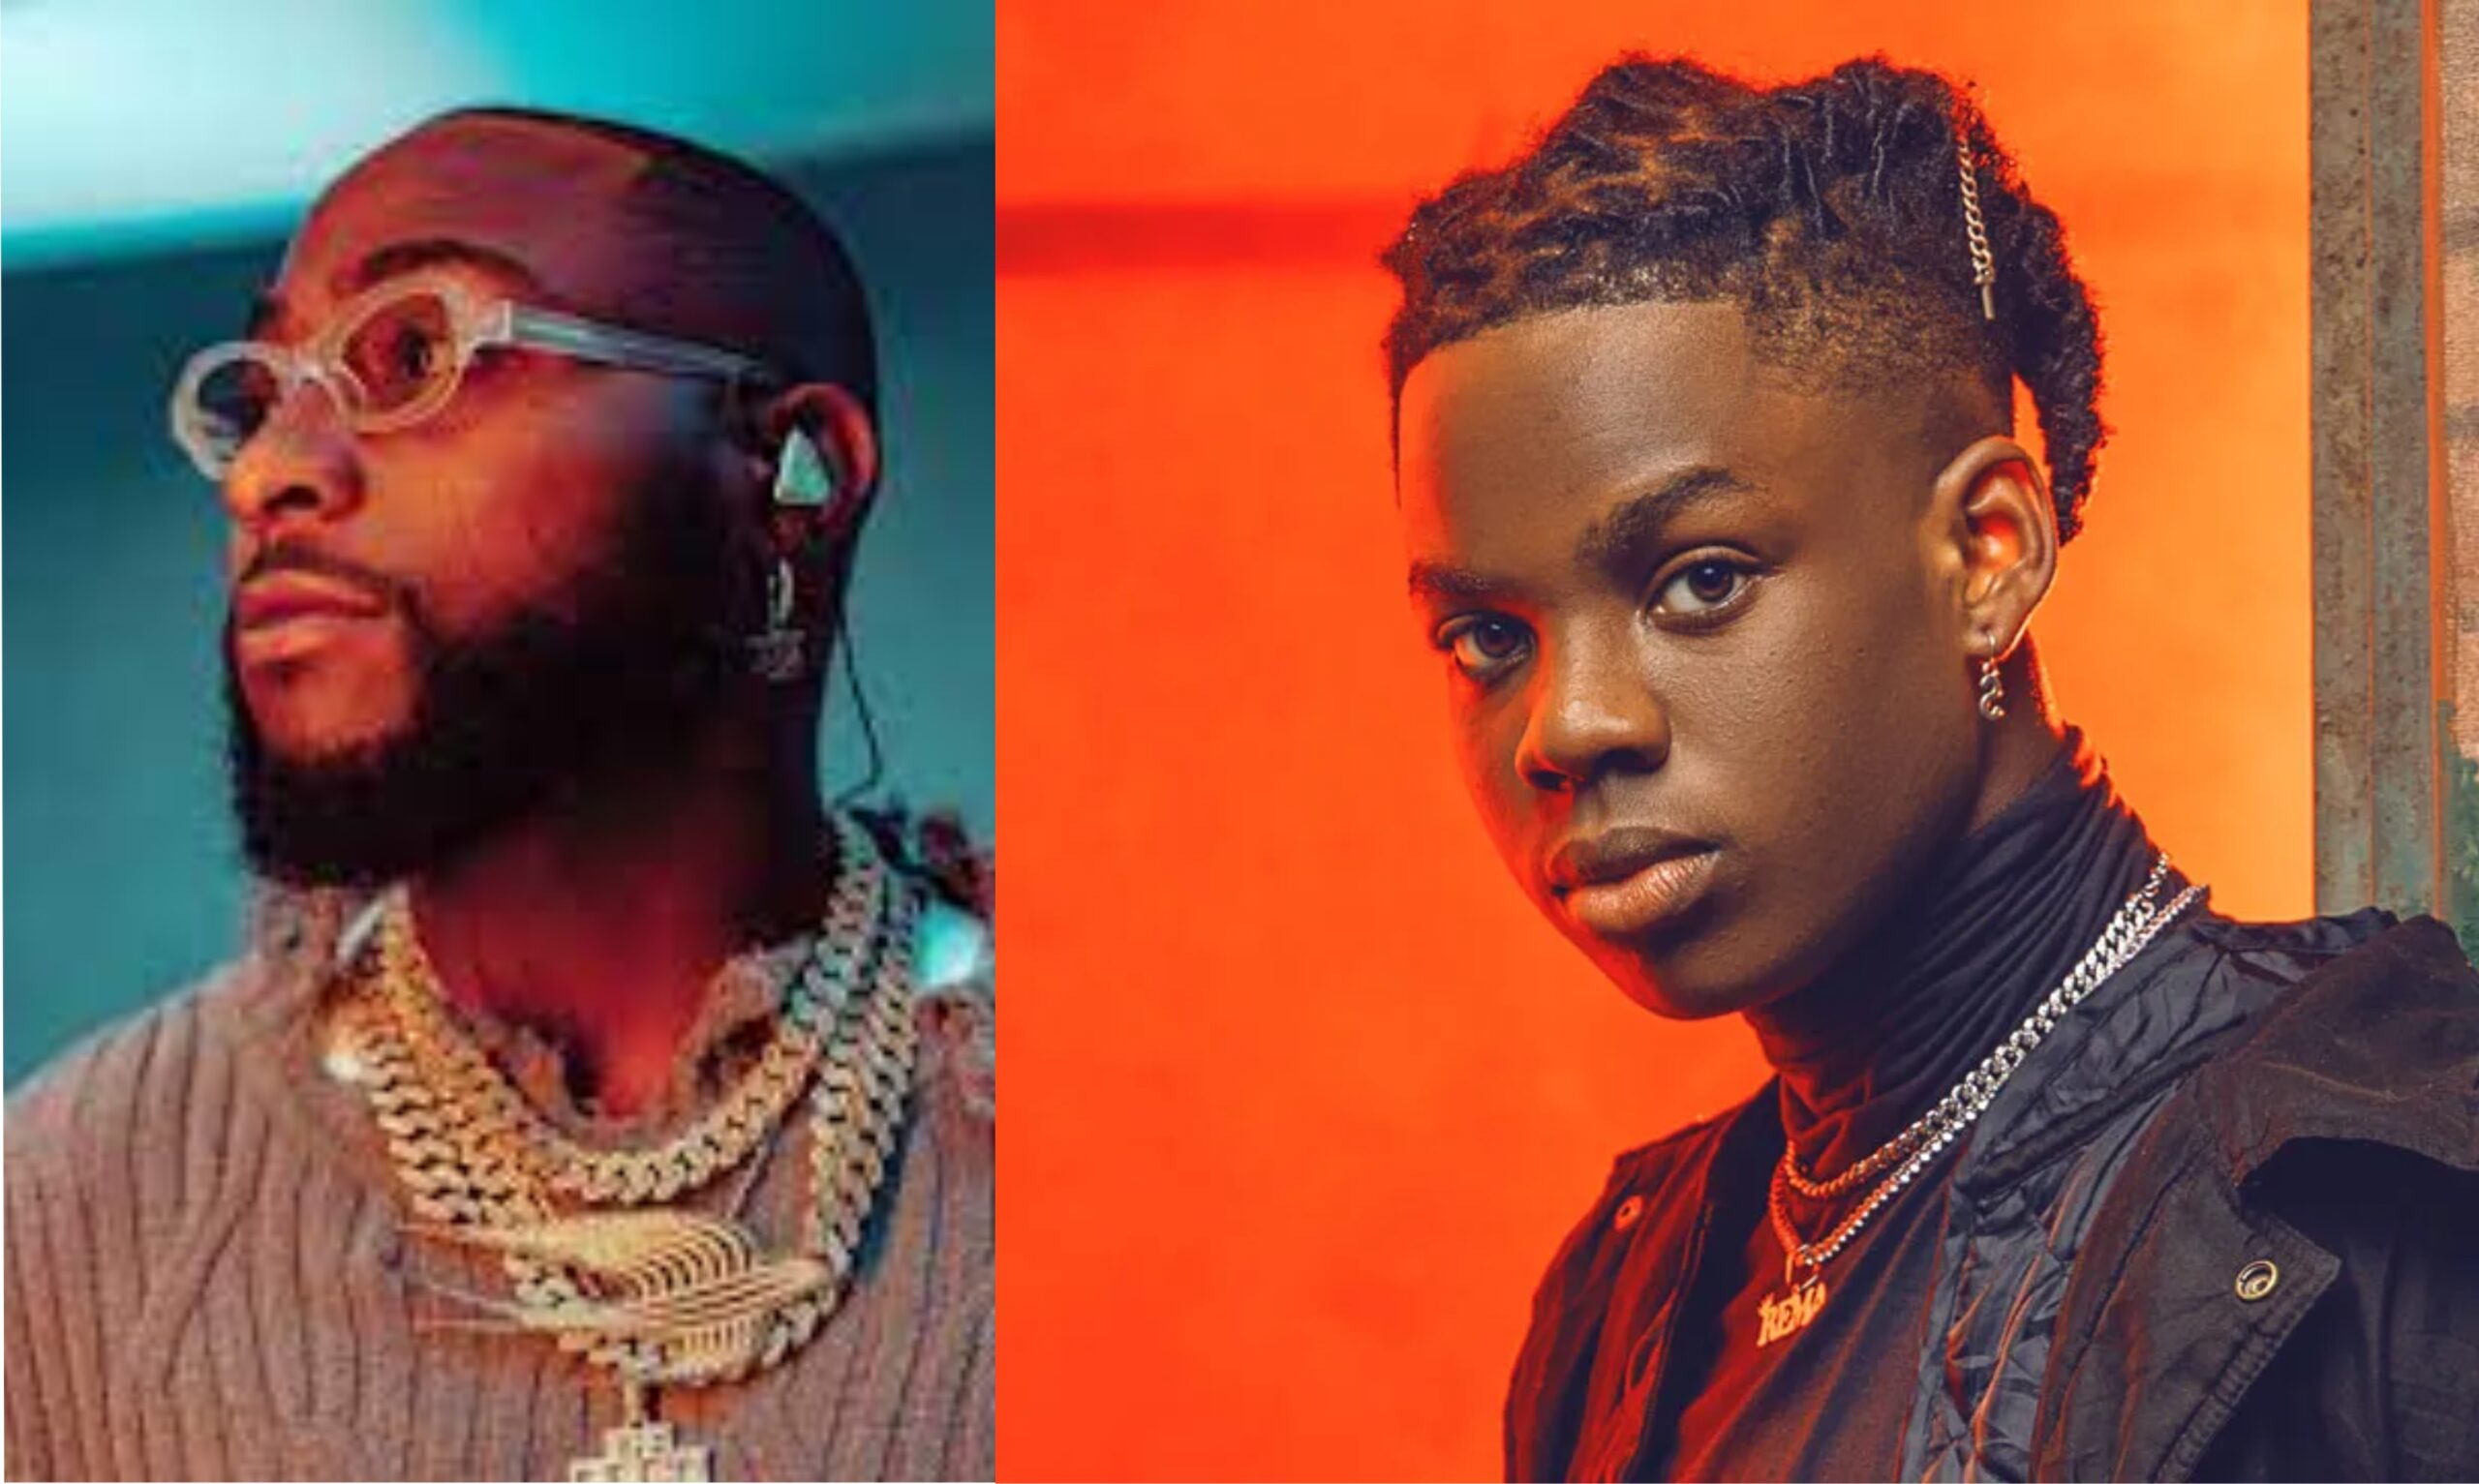 “Davido stands by Rema as the singer postpones December concerts due to health worries”